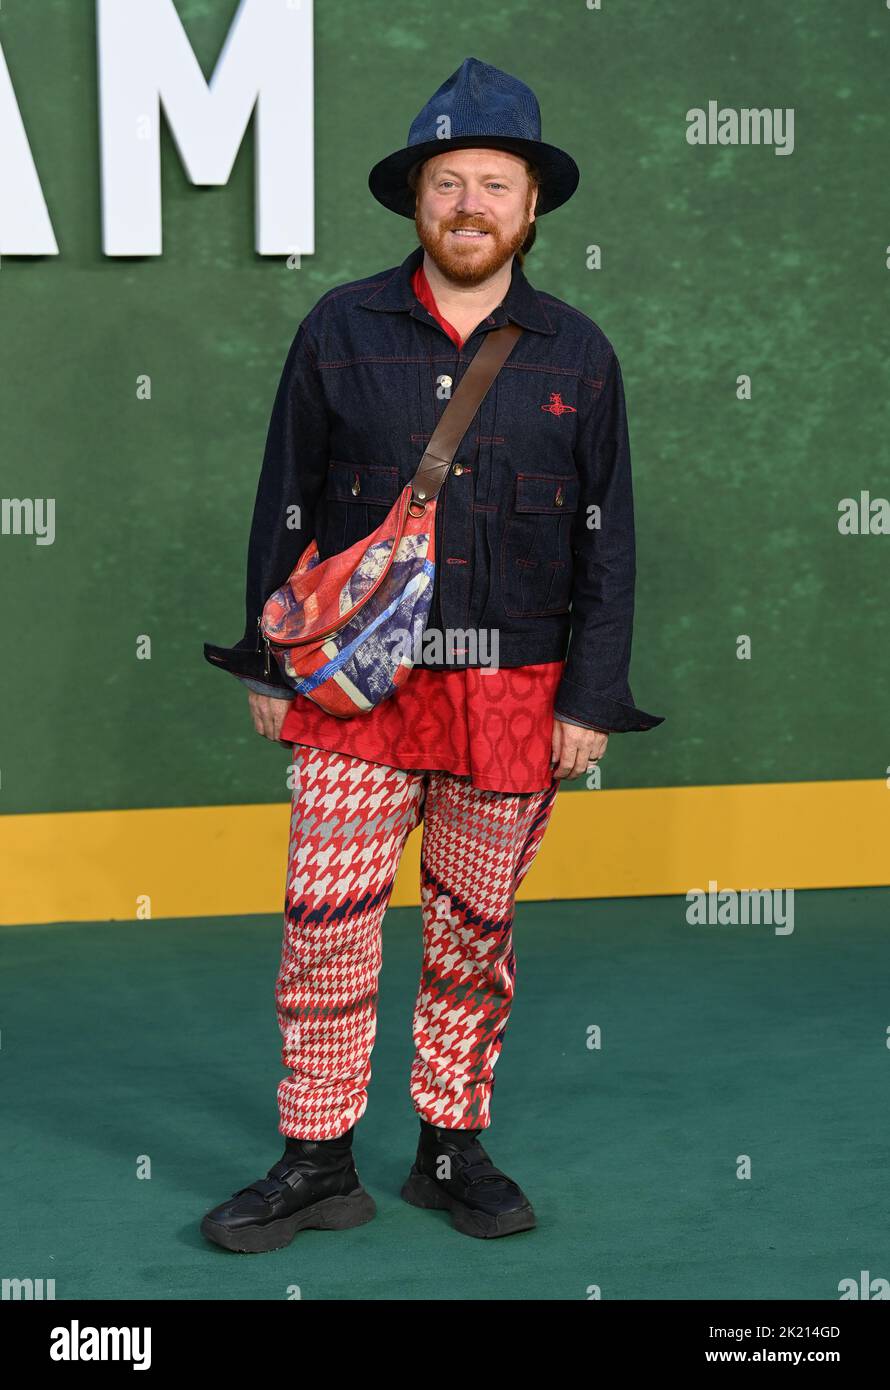 21.. September 2022. London, Großbritannien. Leigh Francis bei der Premiere in Amsterdam, Odeon Luxe, Leicester Square, London. Quelle: Doug Peters/EMPICS/Alamy Live News Stockfoto